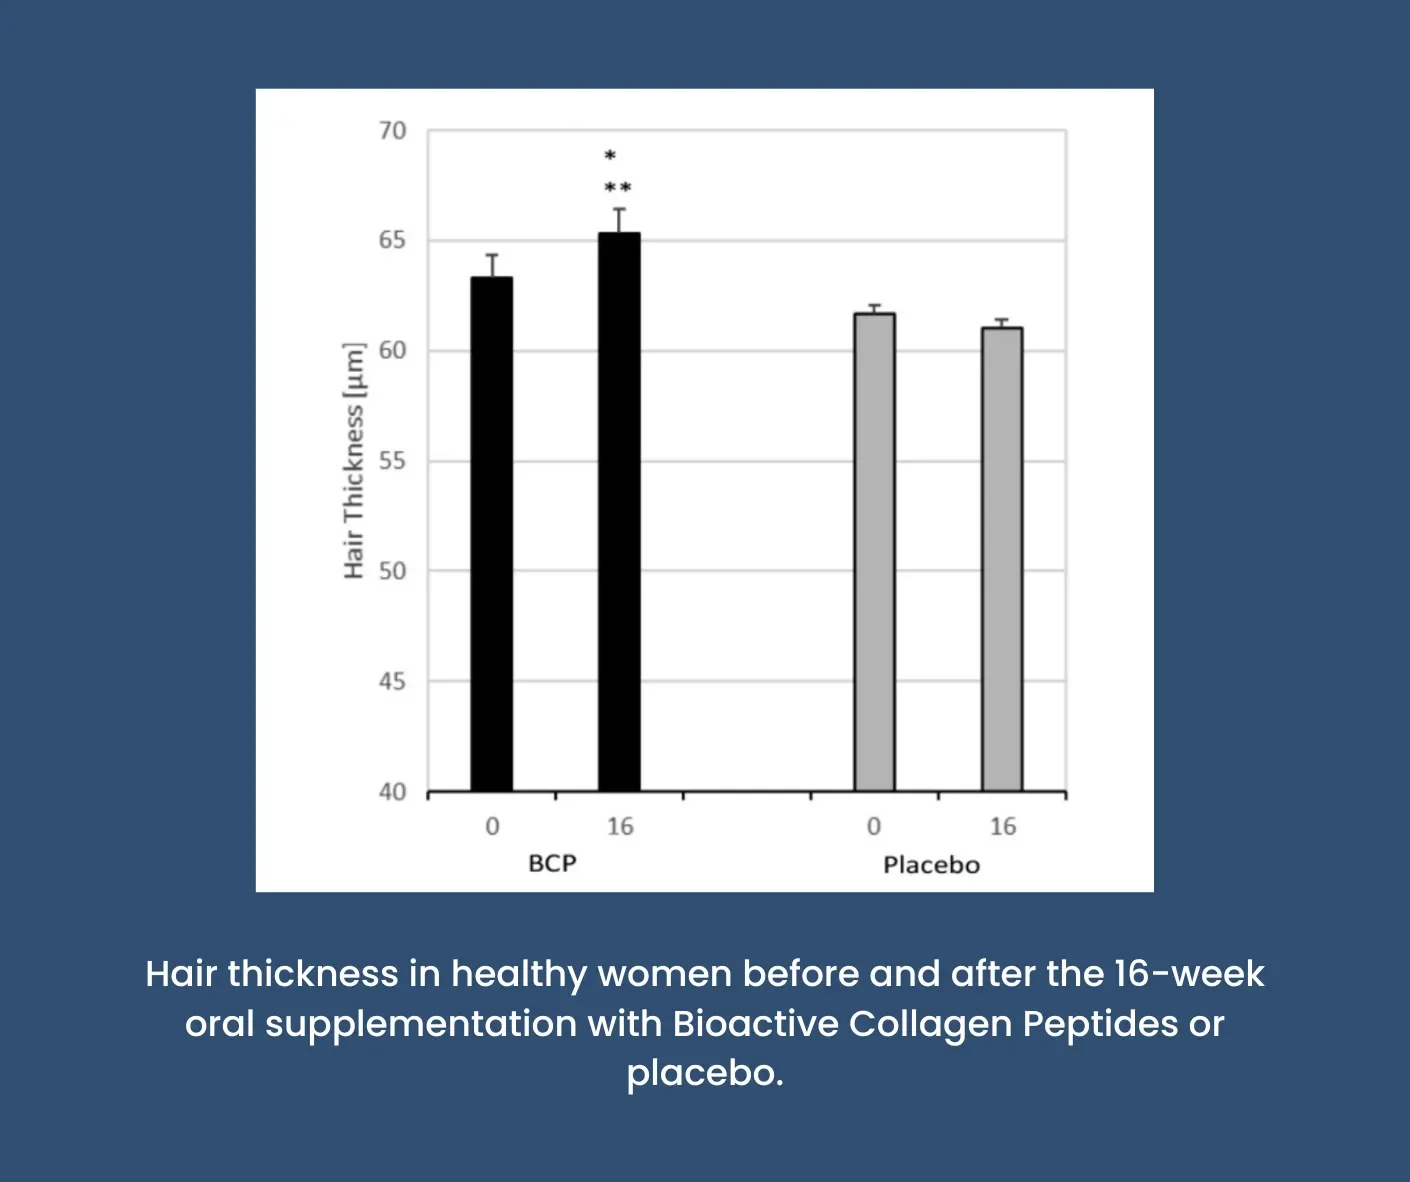 Line graph comparing the hair thickness of participants taking Bioactive Collagen Peptides versus a placebo.